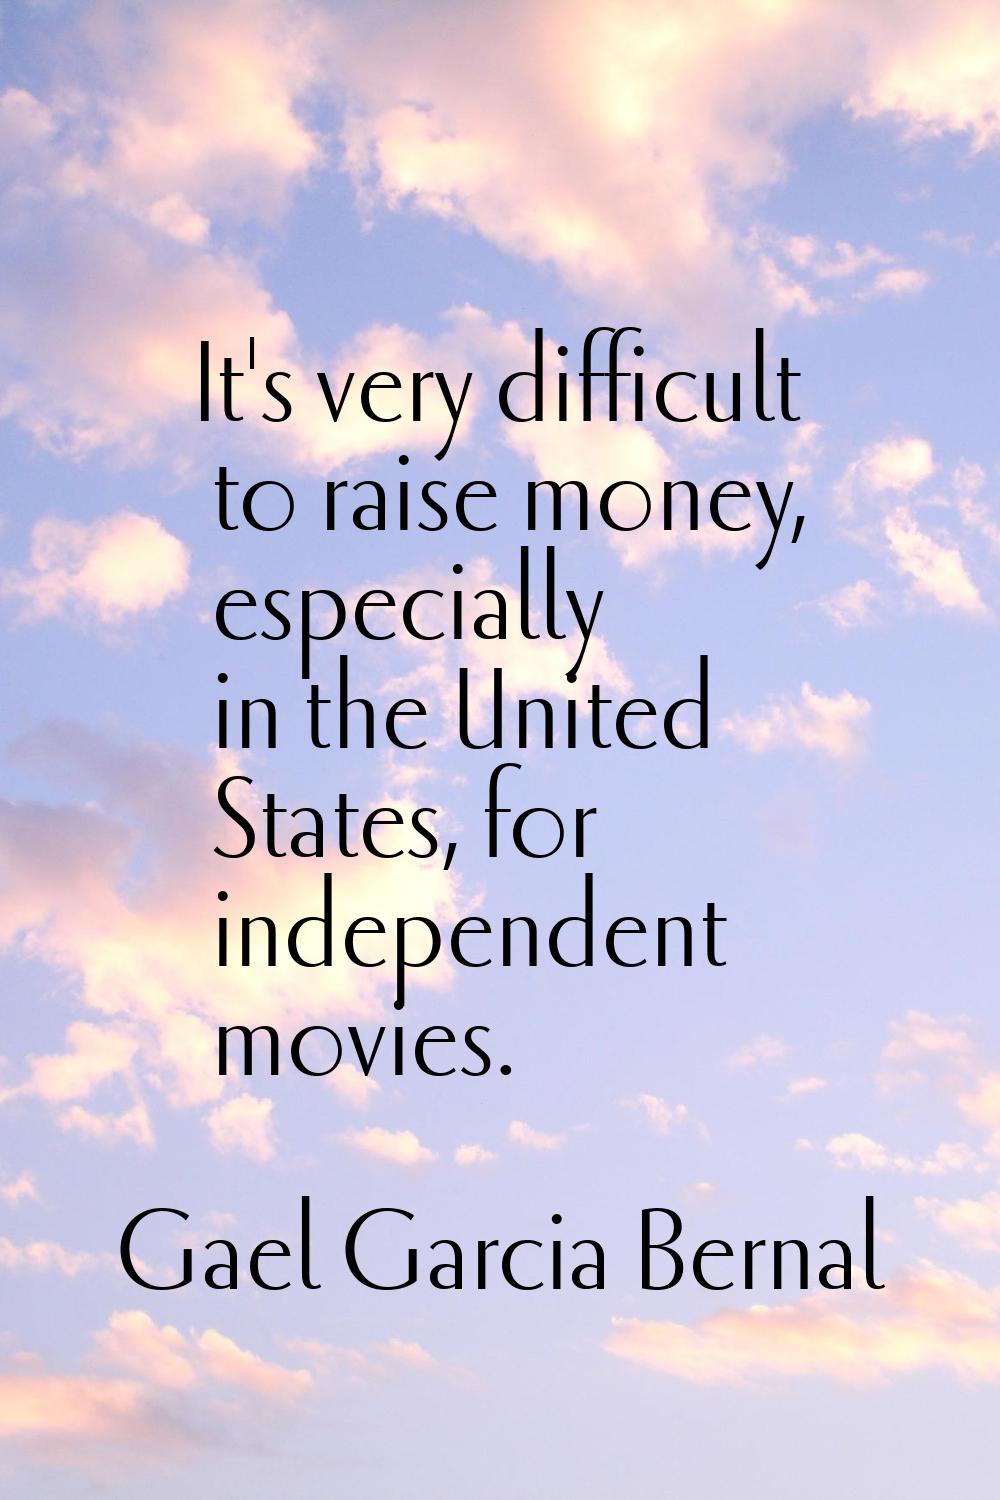 It's very difficult to raise money, especially in the United States, for independent movies.